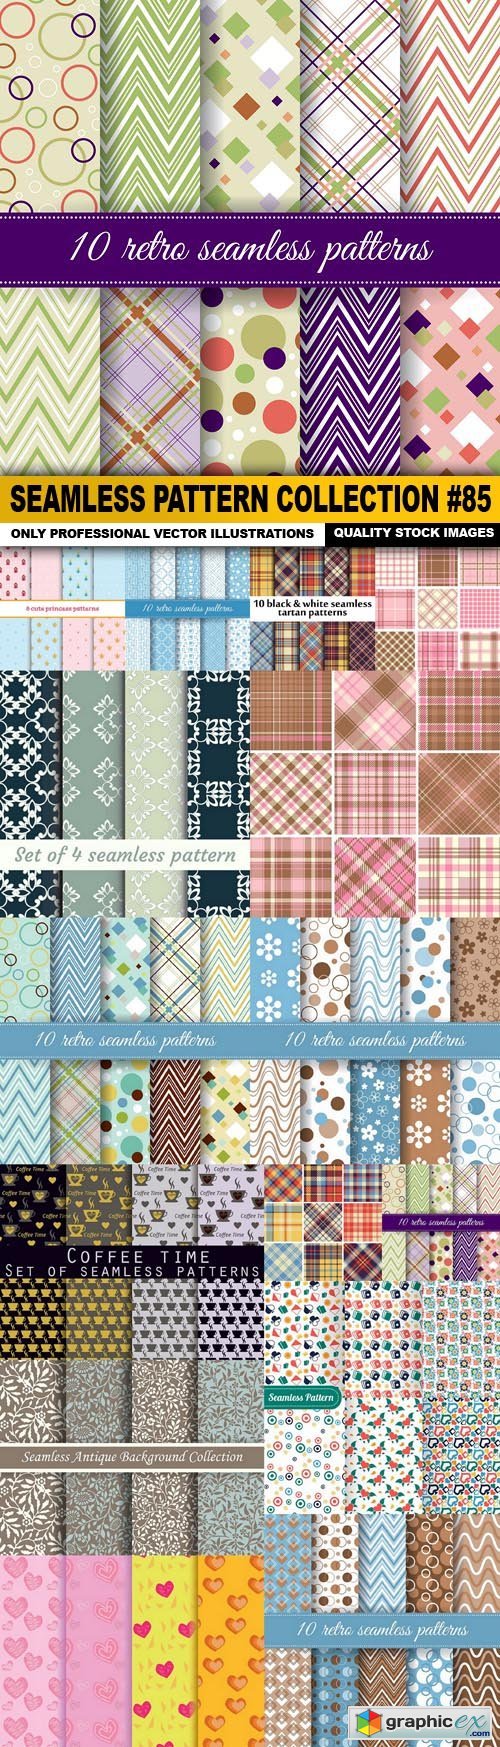 Seamless Pattern Collection #85